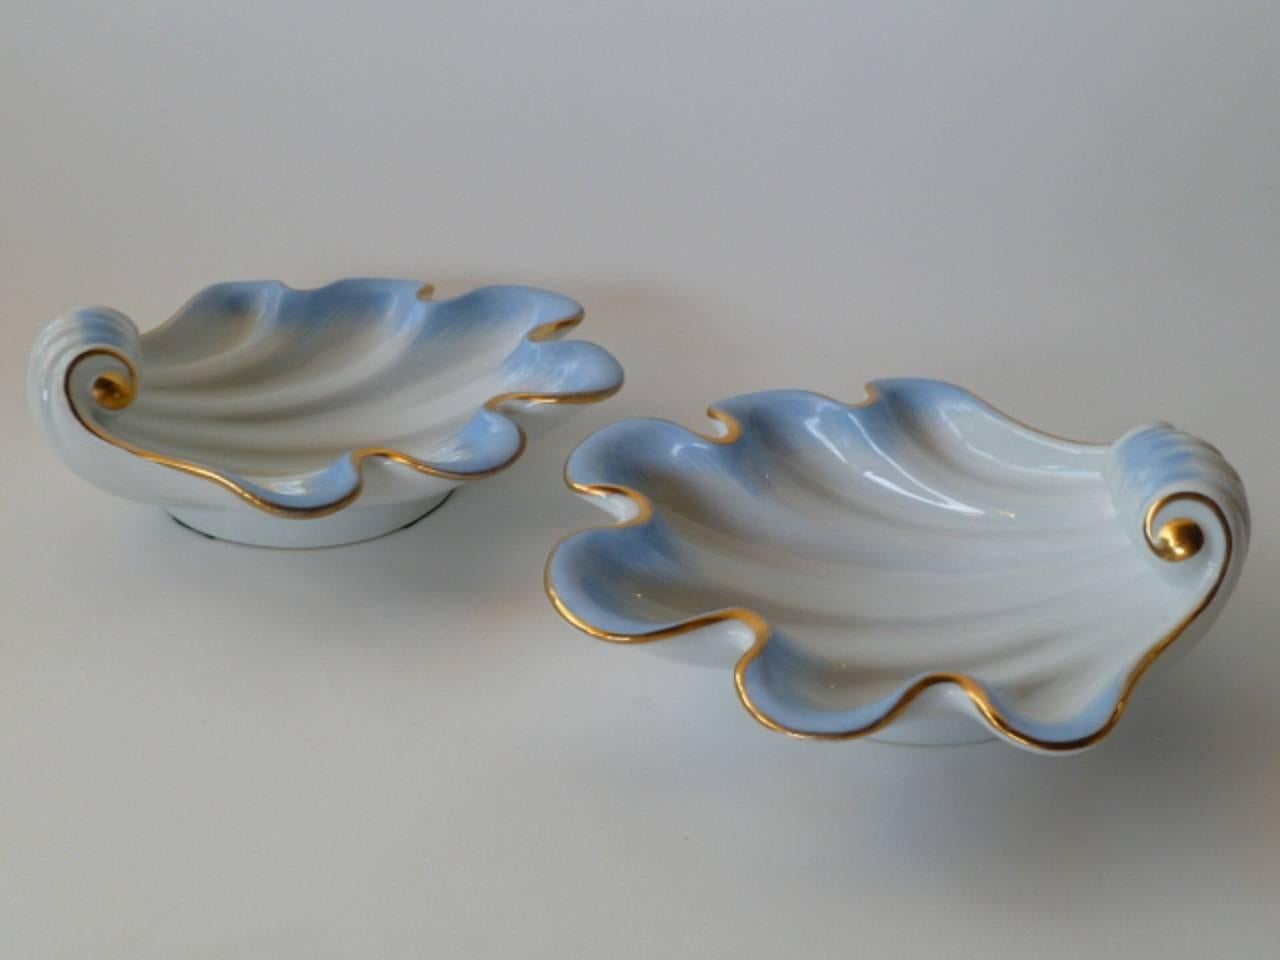 Hand-Painted Pair of Herend Hungary Modern Shell Porcelain Vessels, 1939